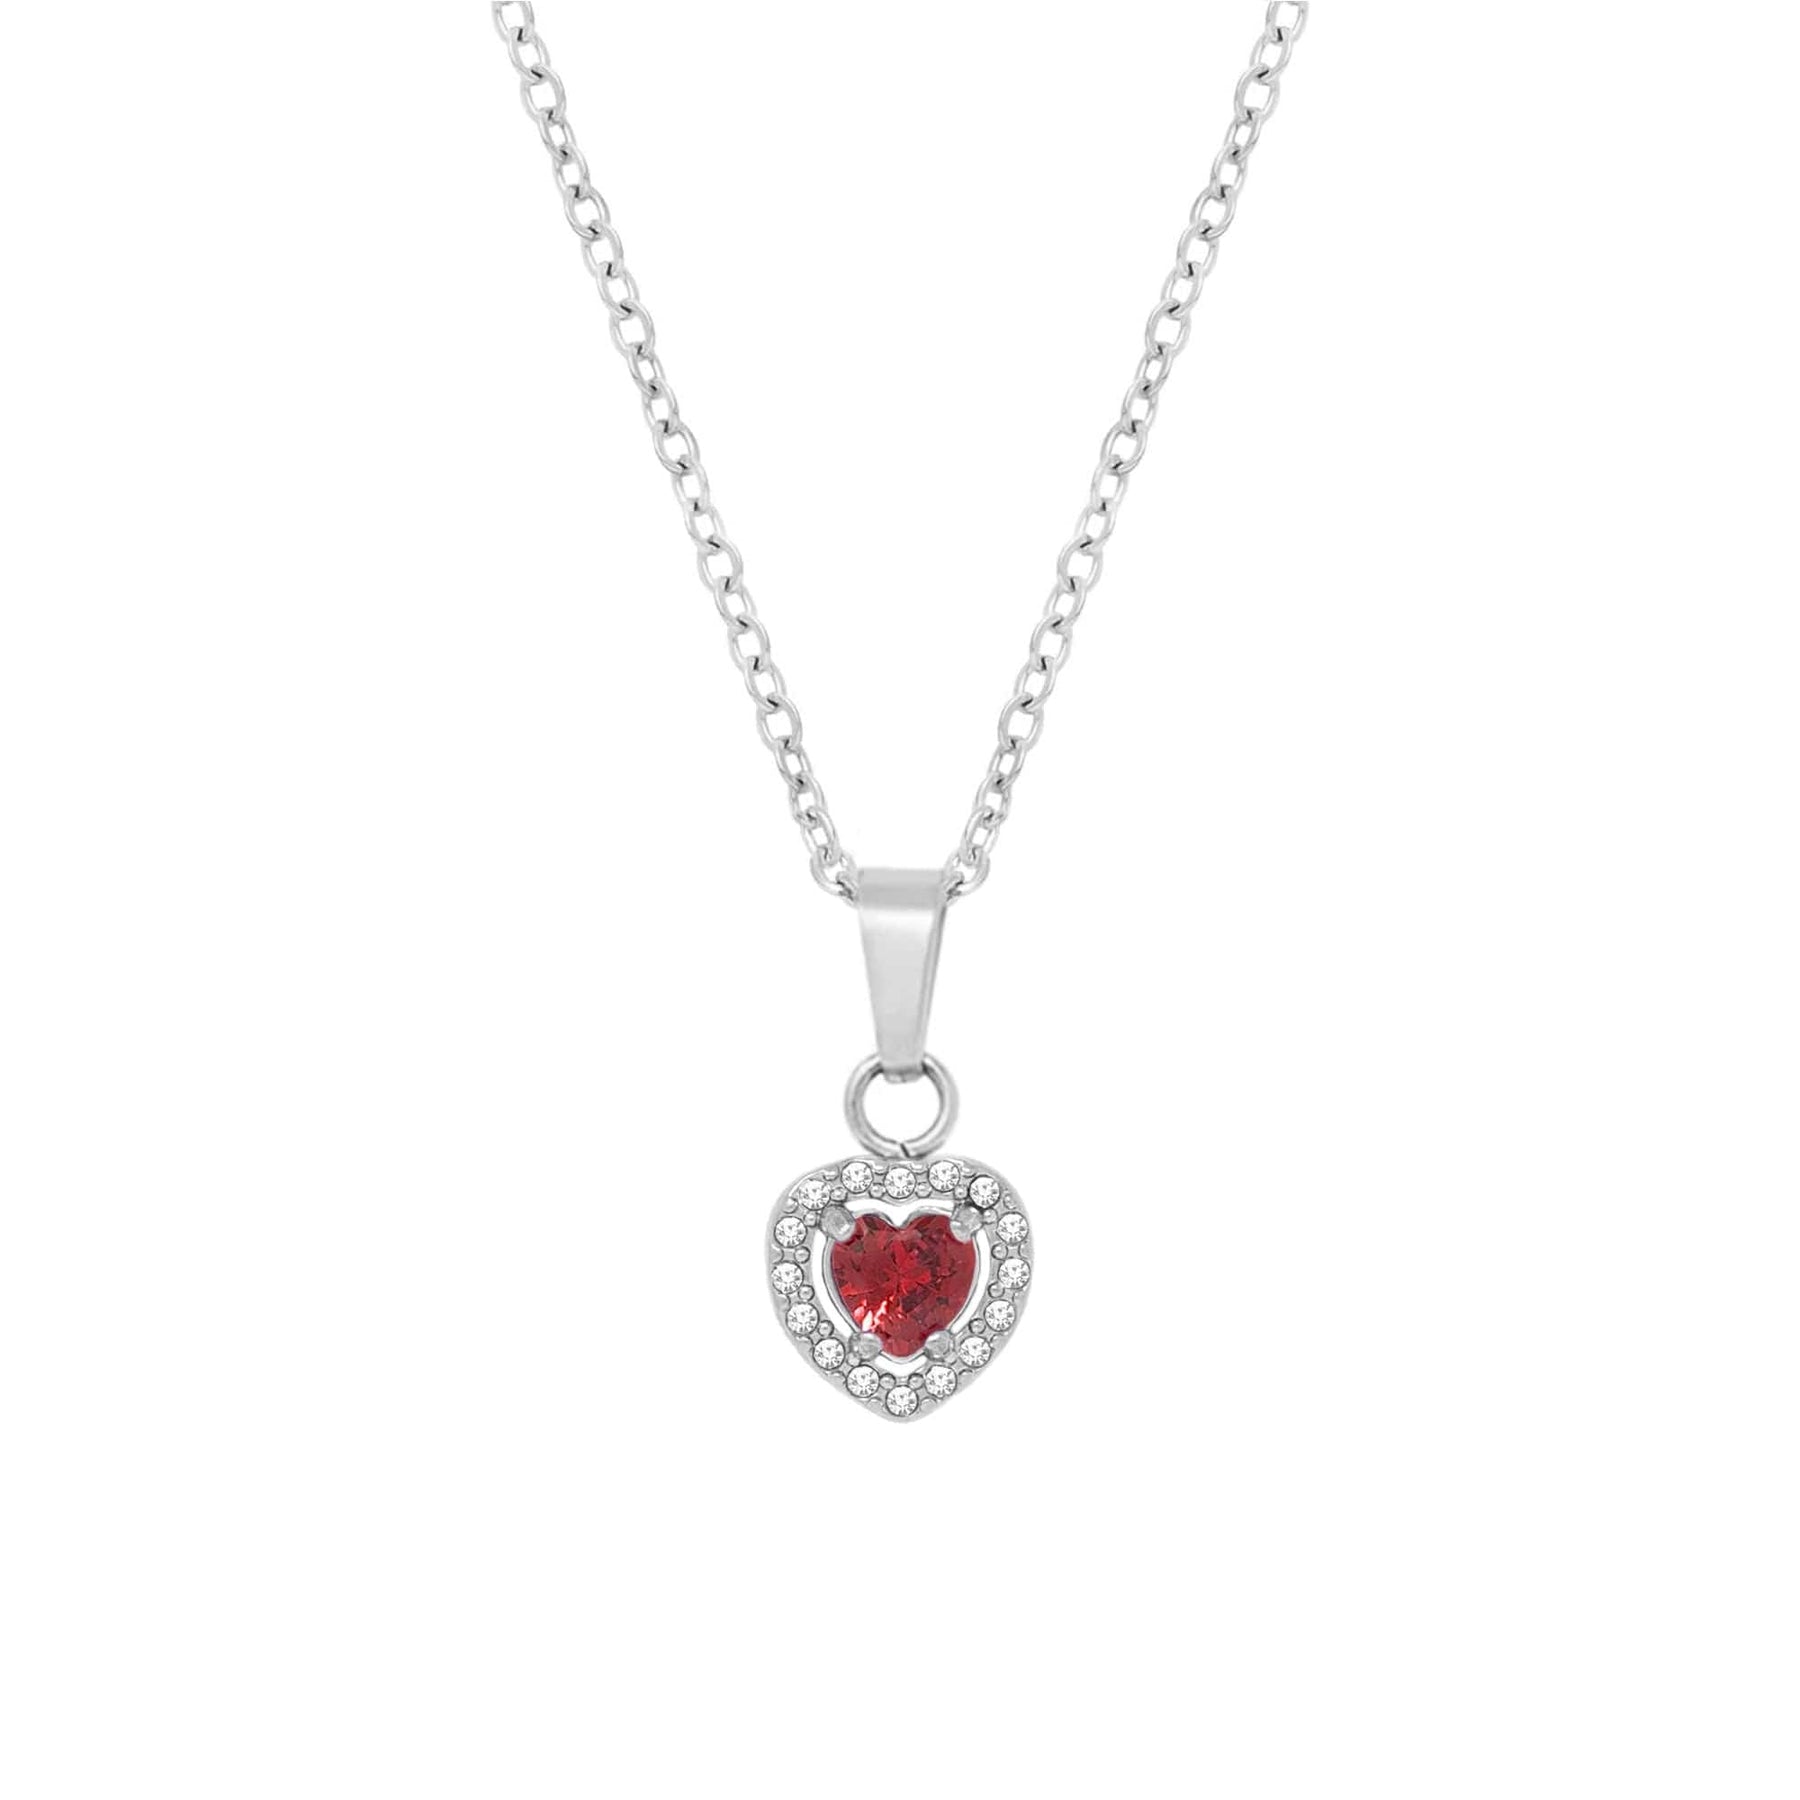 BohoMoon Stainless Steel Infinity Heart Necklace Silver / Red